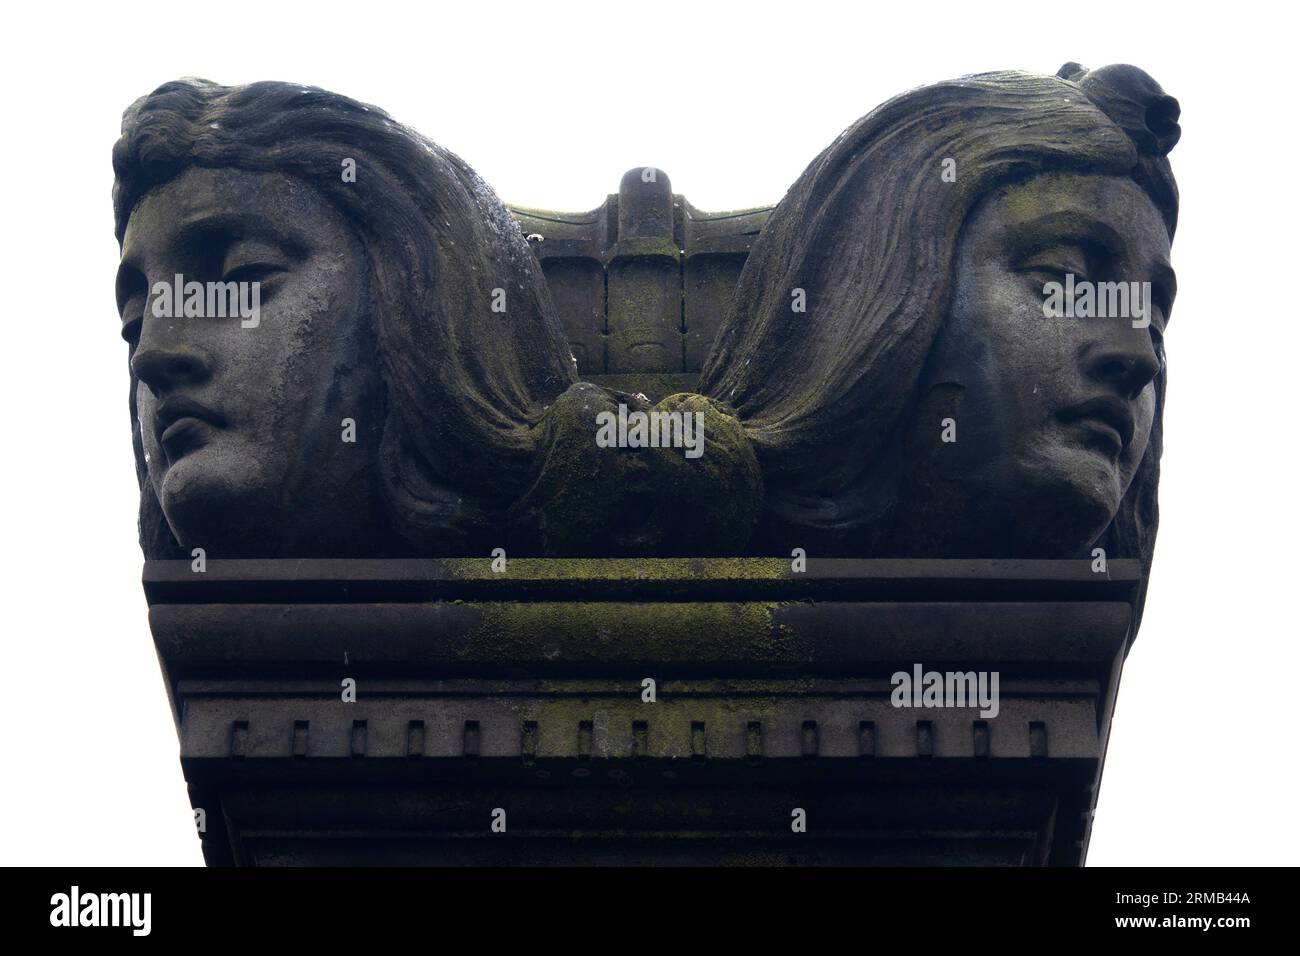 Two female heads looking in opposite directions, funerary art on a grave in Glasgow Necropolis, Glasgow Scotland UK Stock Photo